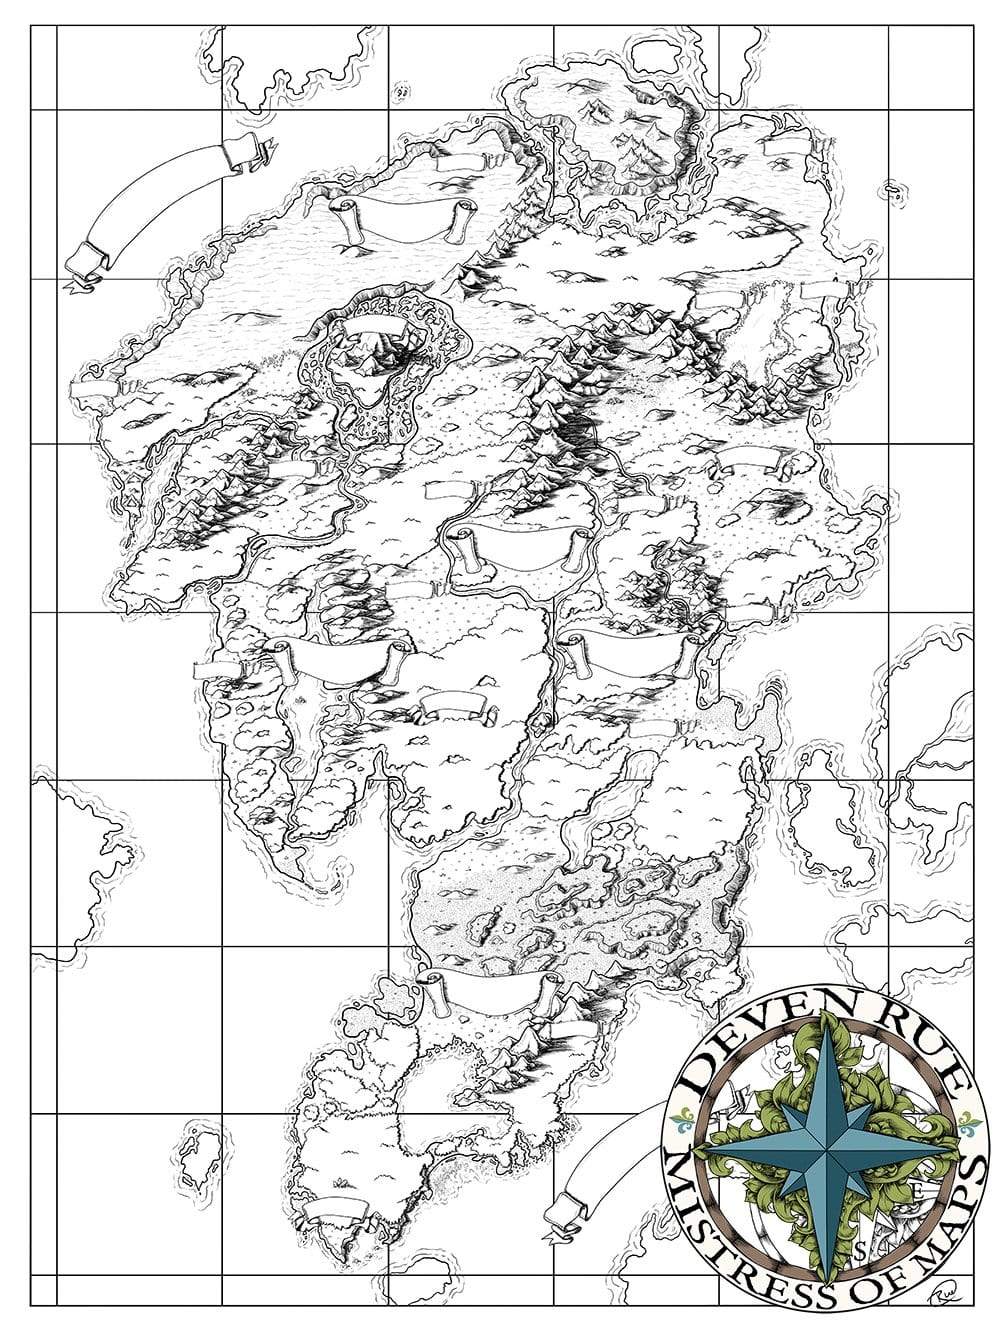 A preview of the Ayon printed prop map 36x27" black and white version without text by Deven Rue.